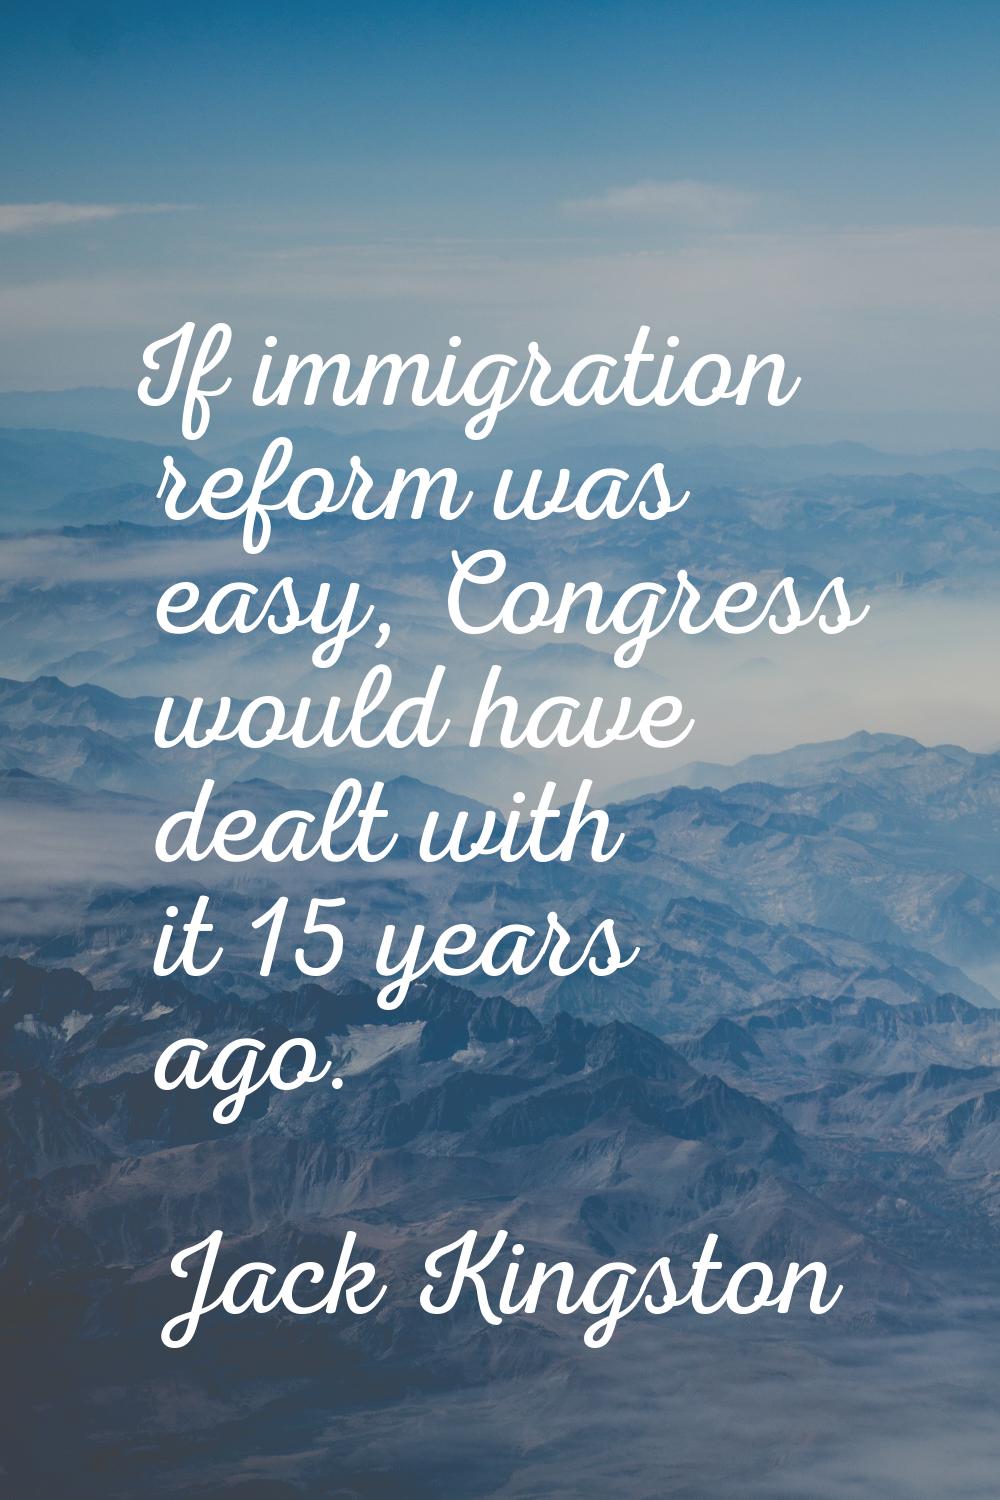 If immigration reform was easy, Congress would have dealt with it 15 years ago.